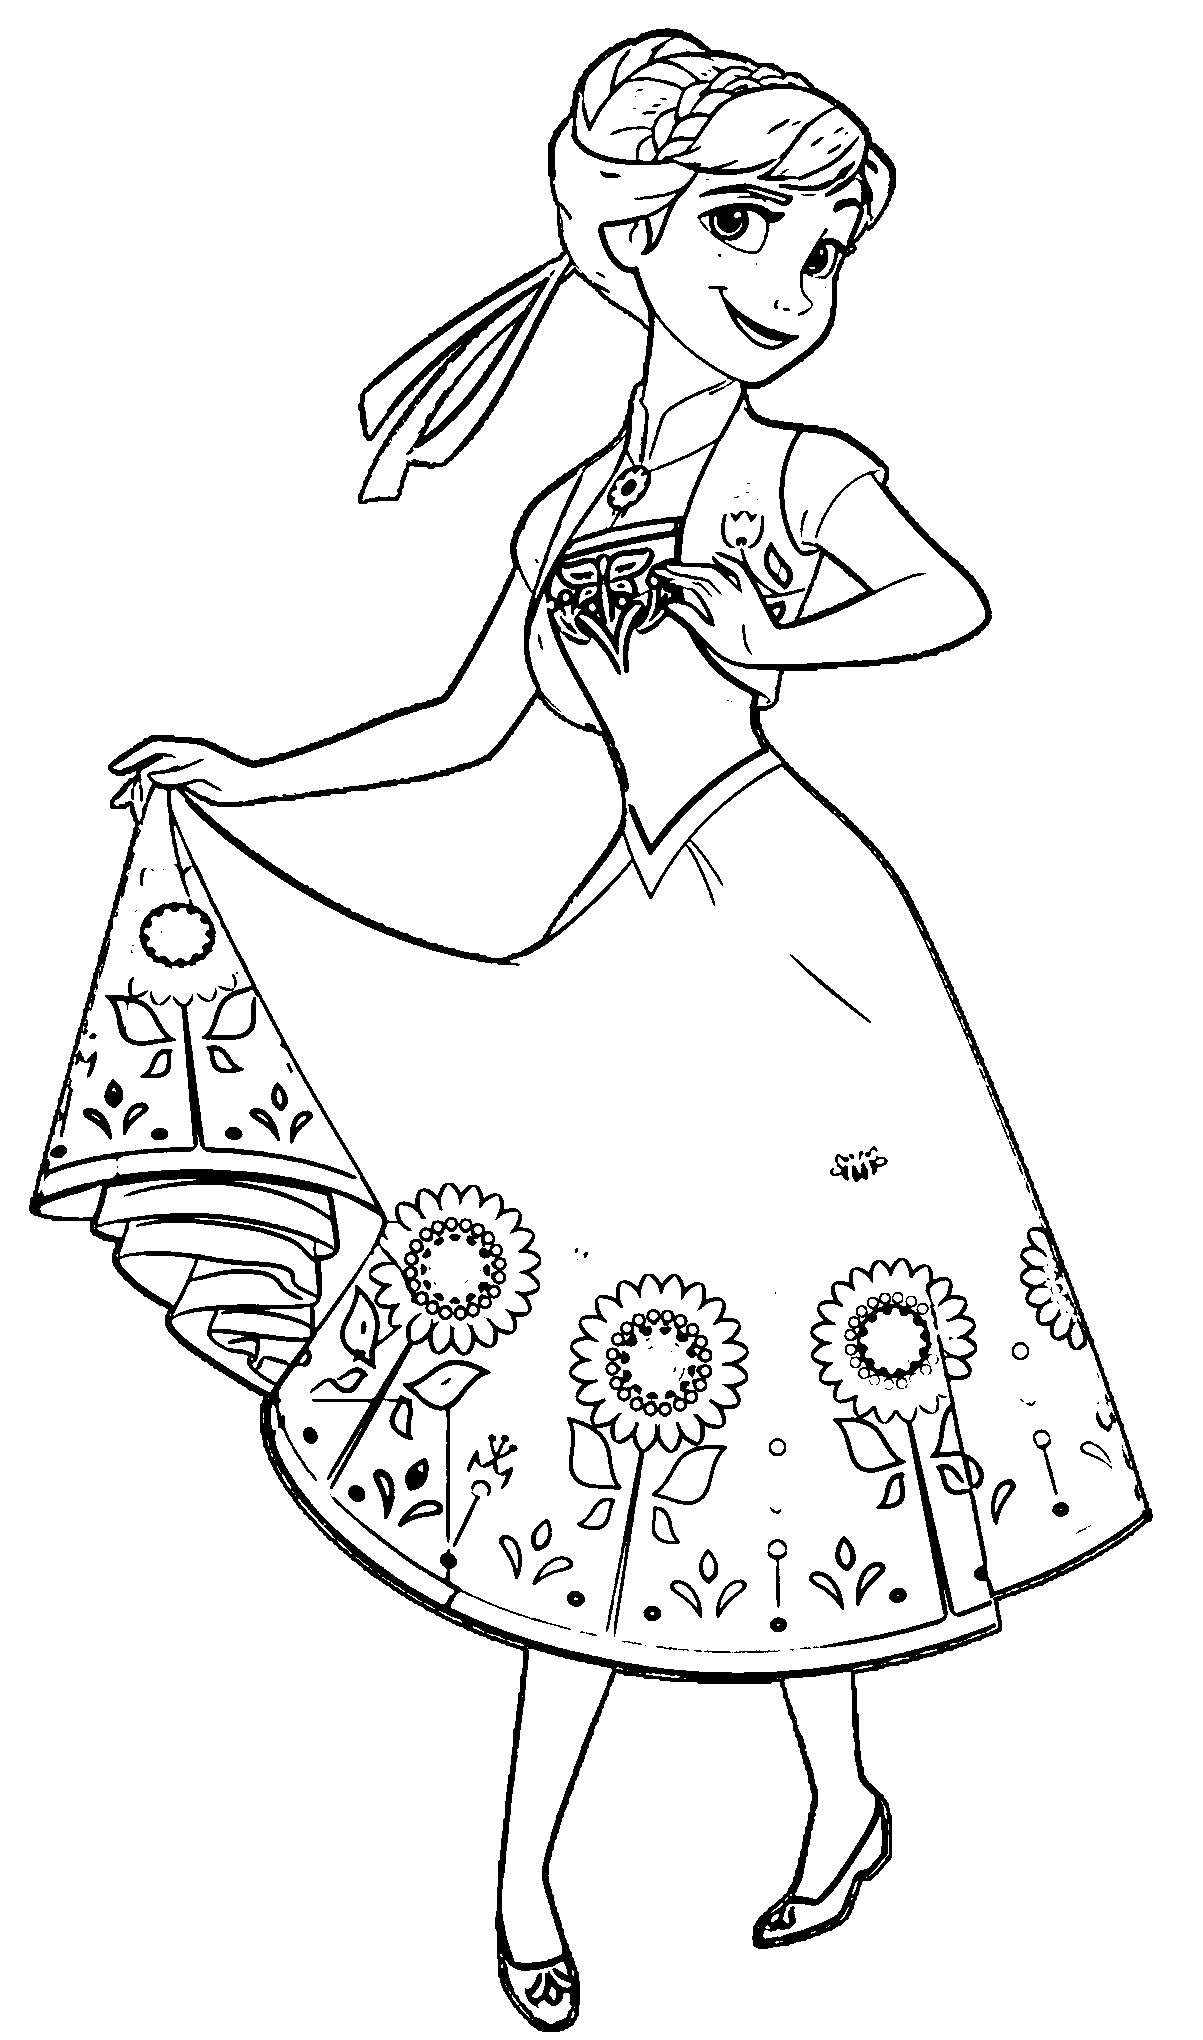 Elsa And Anna Coloring Pages Printable at GetColorings.com ...